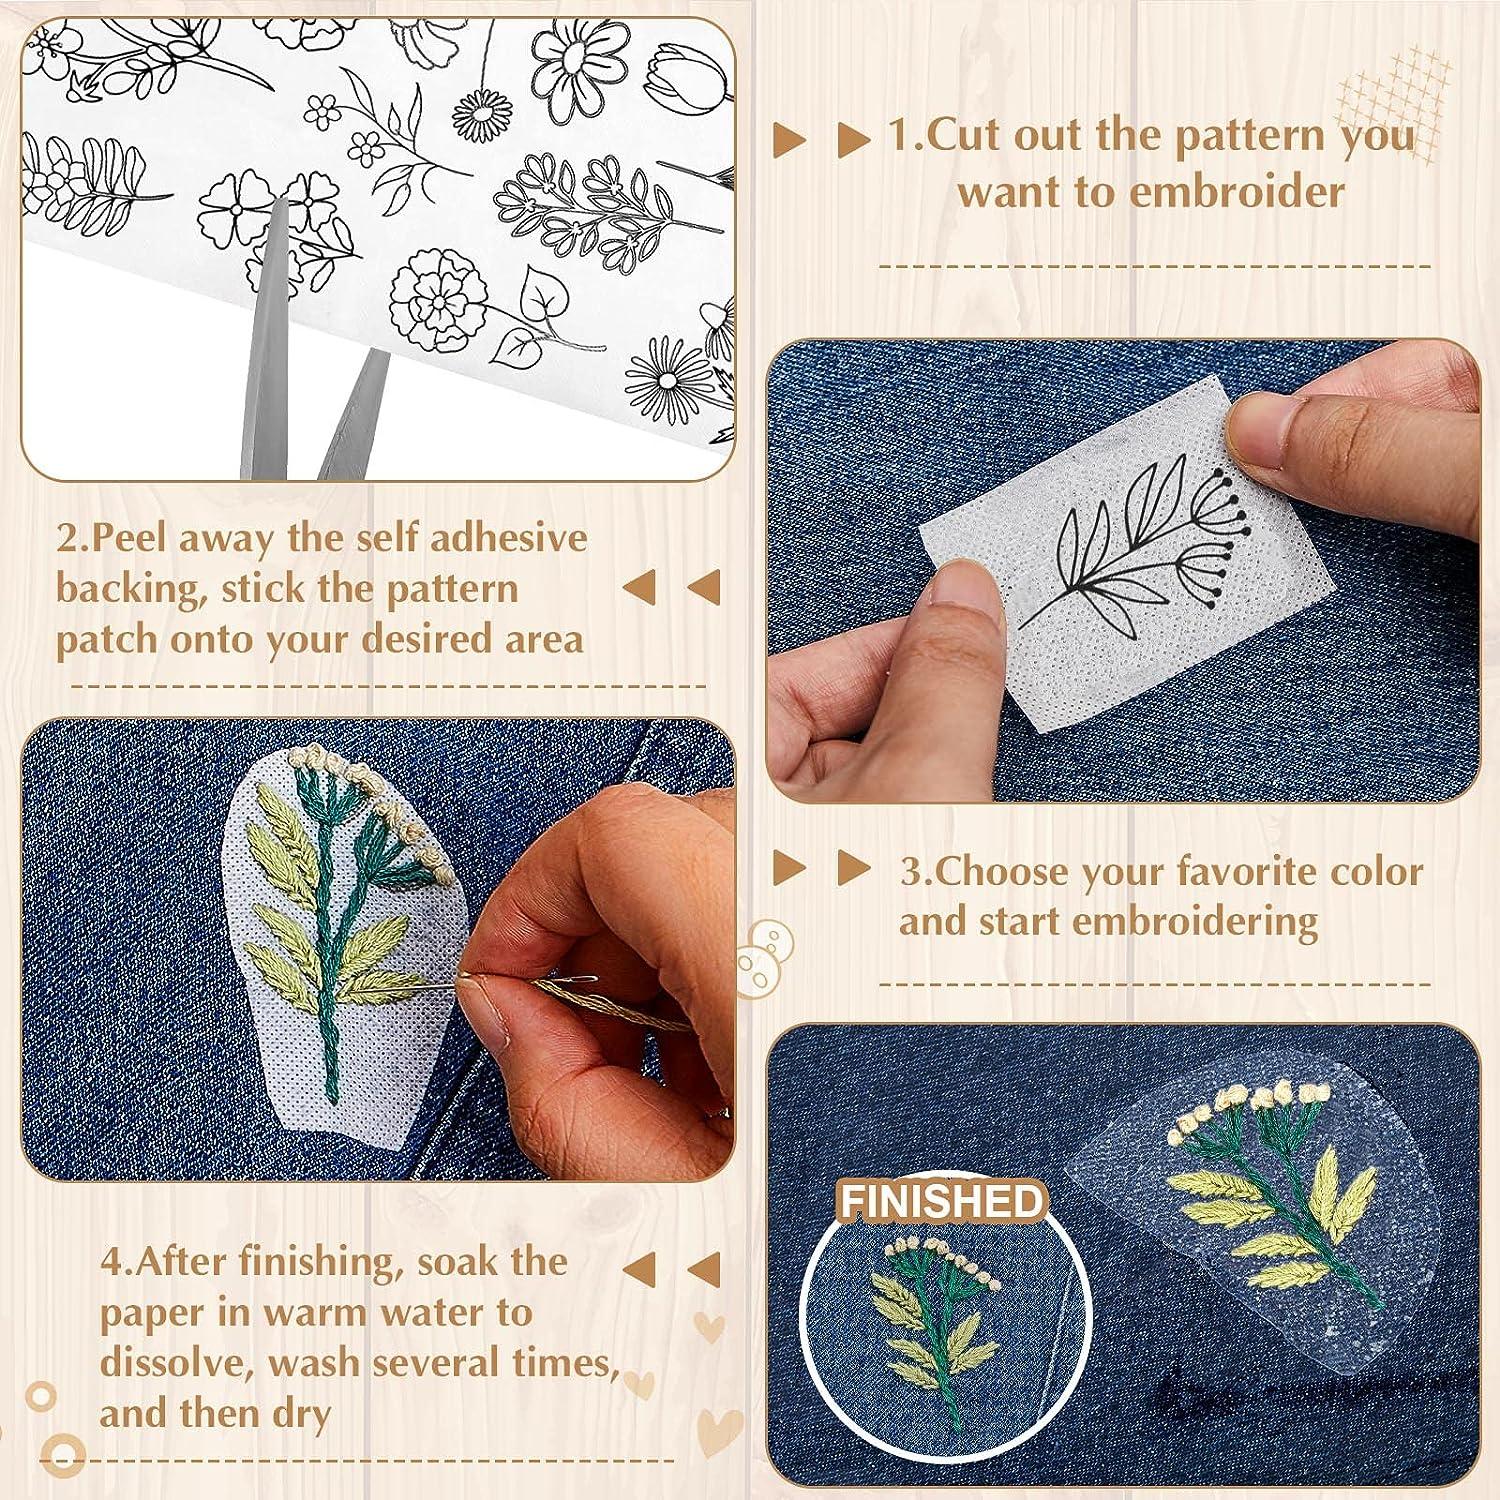  Jacsunco 50 Pcs Water Soluble Hand Sewing Stabilizers Wash Away  Stabilizer for Embroidery Fabric Embroidery Stabilizers with Pre-Printed  Leaves Pattern Transfers for Embroidery Hand Sewing Lover